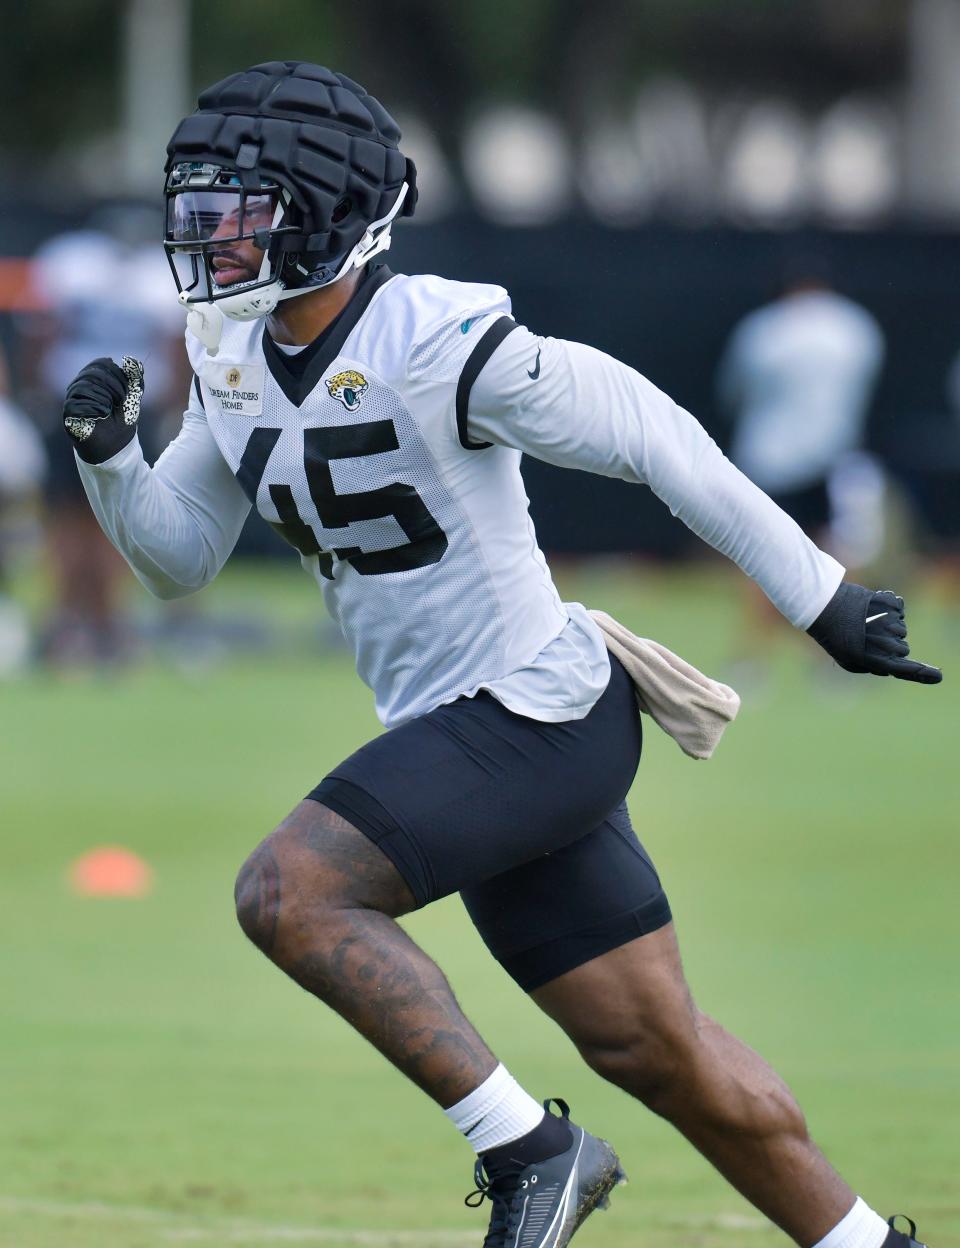 Jaguars edge rusher K'Lavon Chaisson runs through drills Friday at the Jaguars' Miller Electric Center. The 2020 first-rounder has recorded three sacks in his first three NFL seasons.